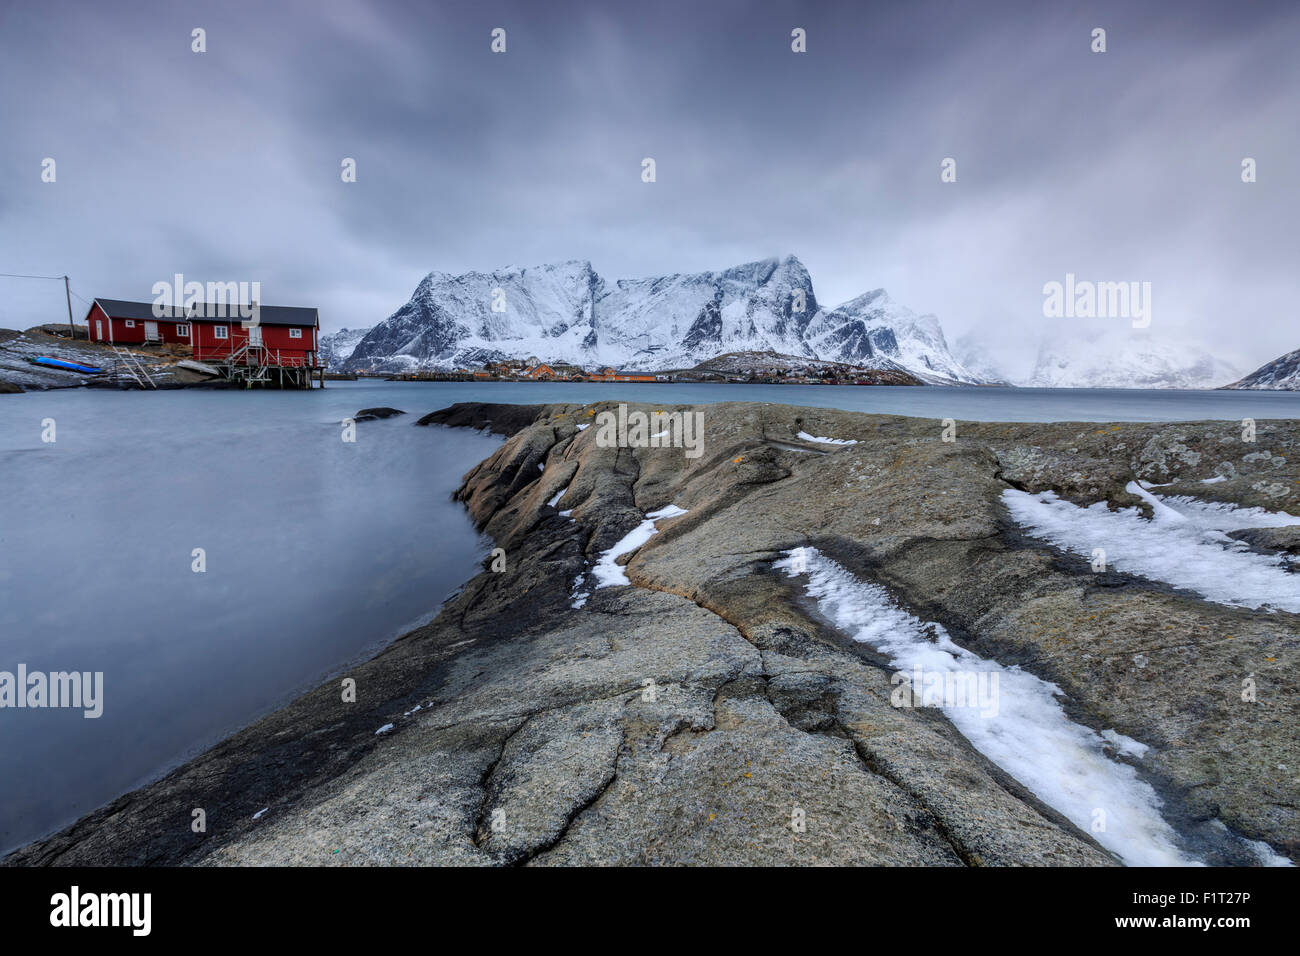 Typical landscape of Hamnoy with red houses of fishermen and the snowy mountains, Lofoten Islands, Norway, Scandinavia, Arctic Stock Photo